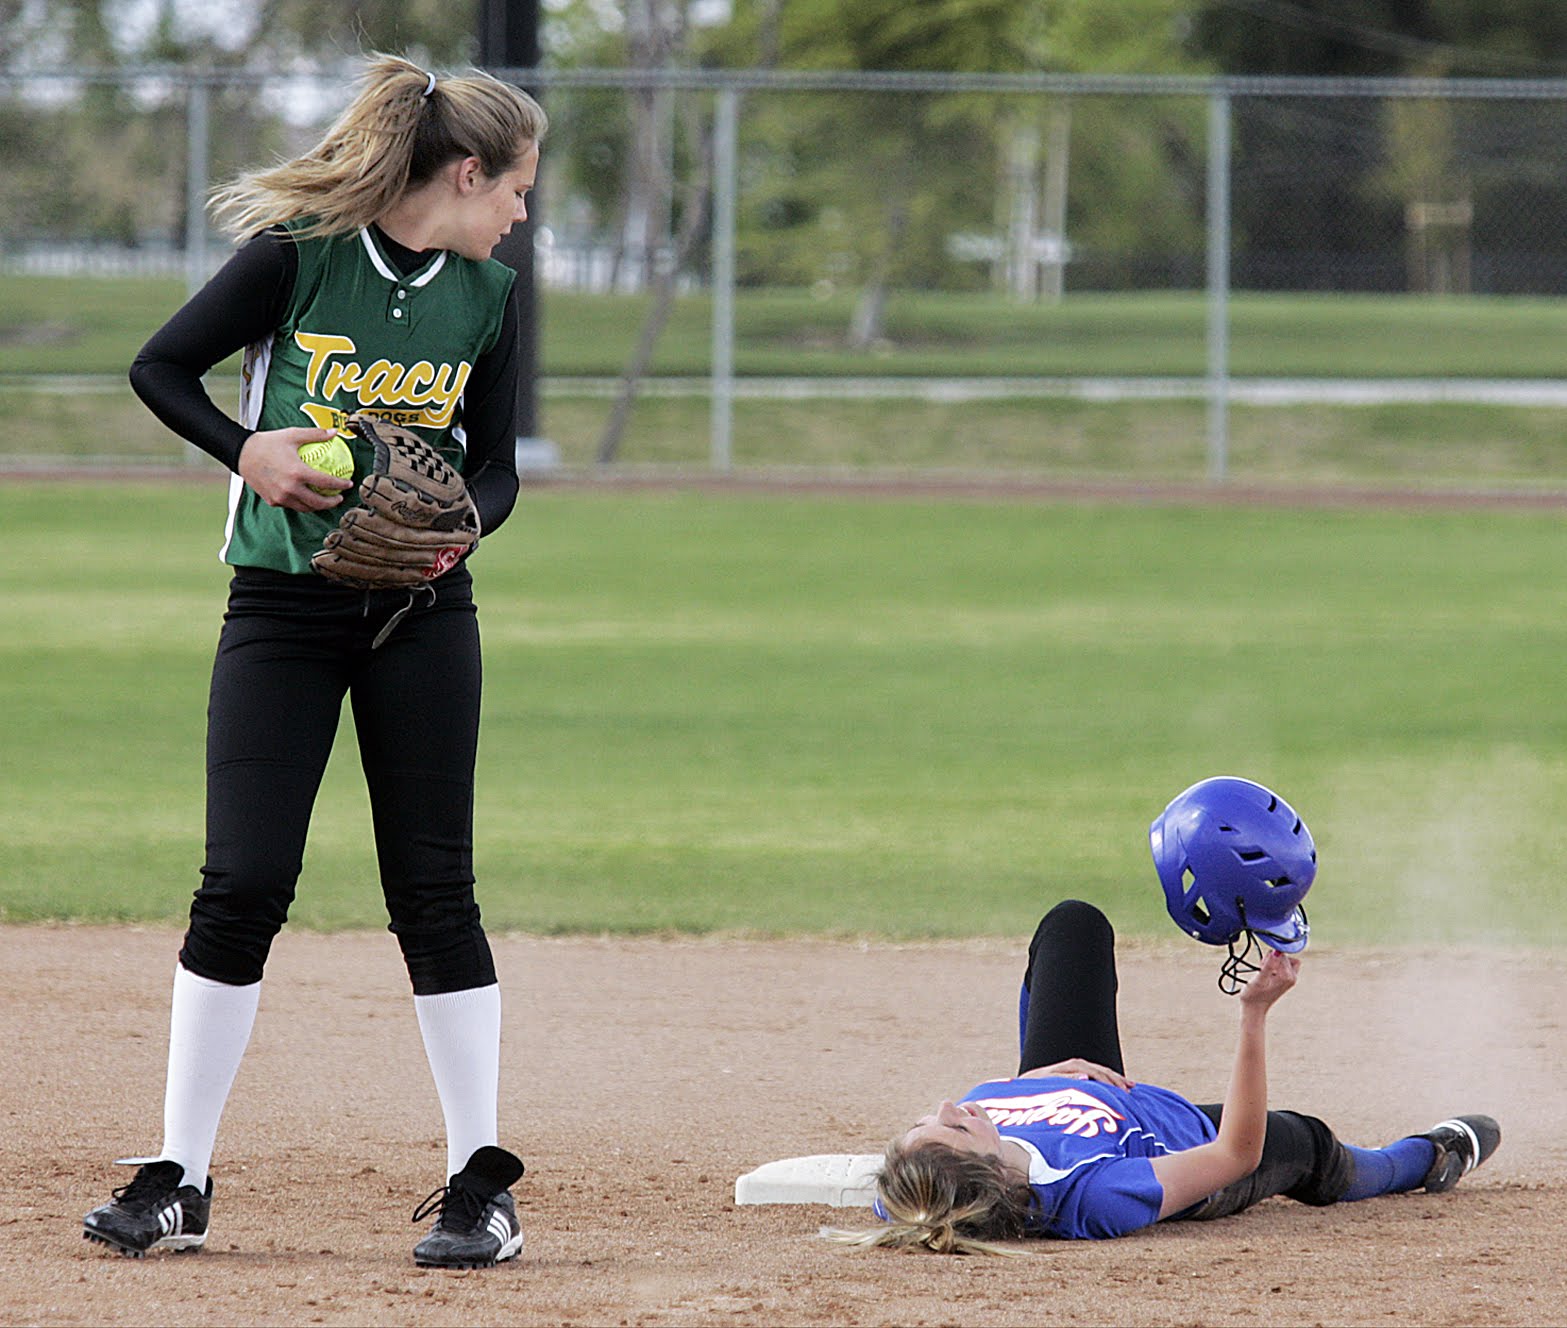 A woman is sliding into a base while another woman stands over her with a softball in her glove. - Softball